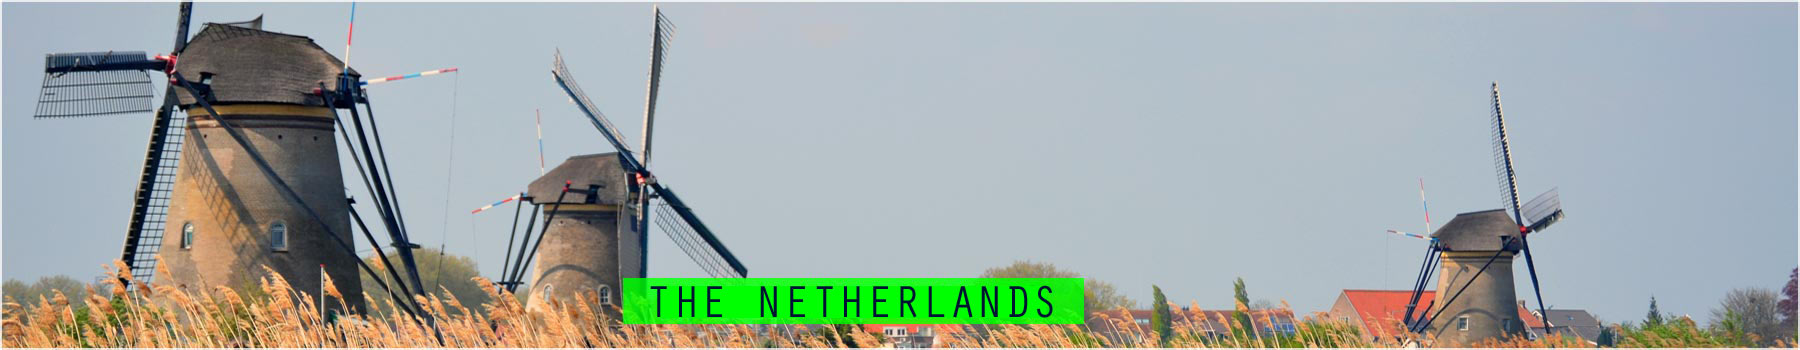 ExpatINFO Holland